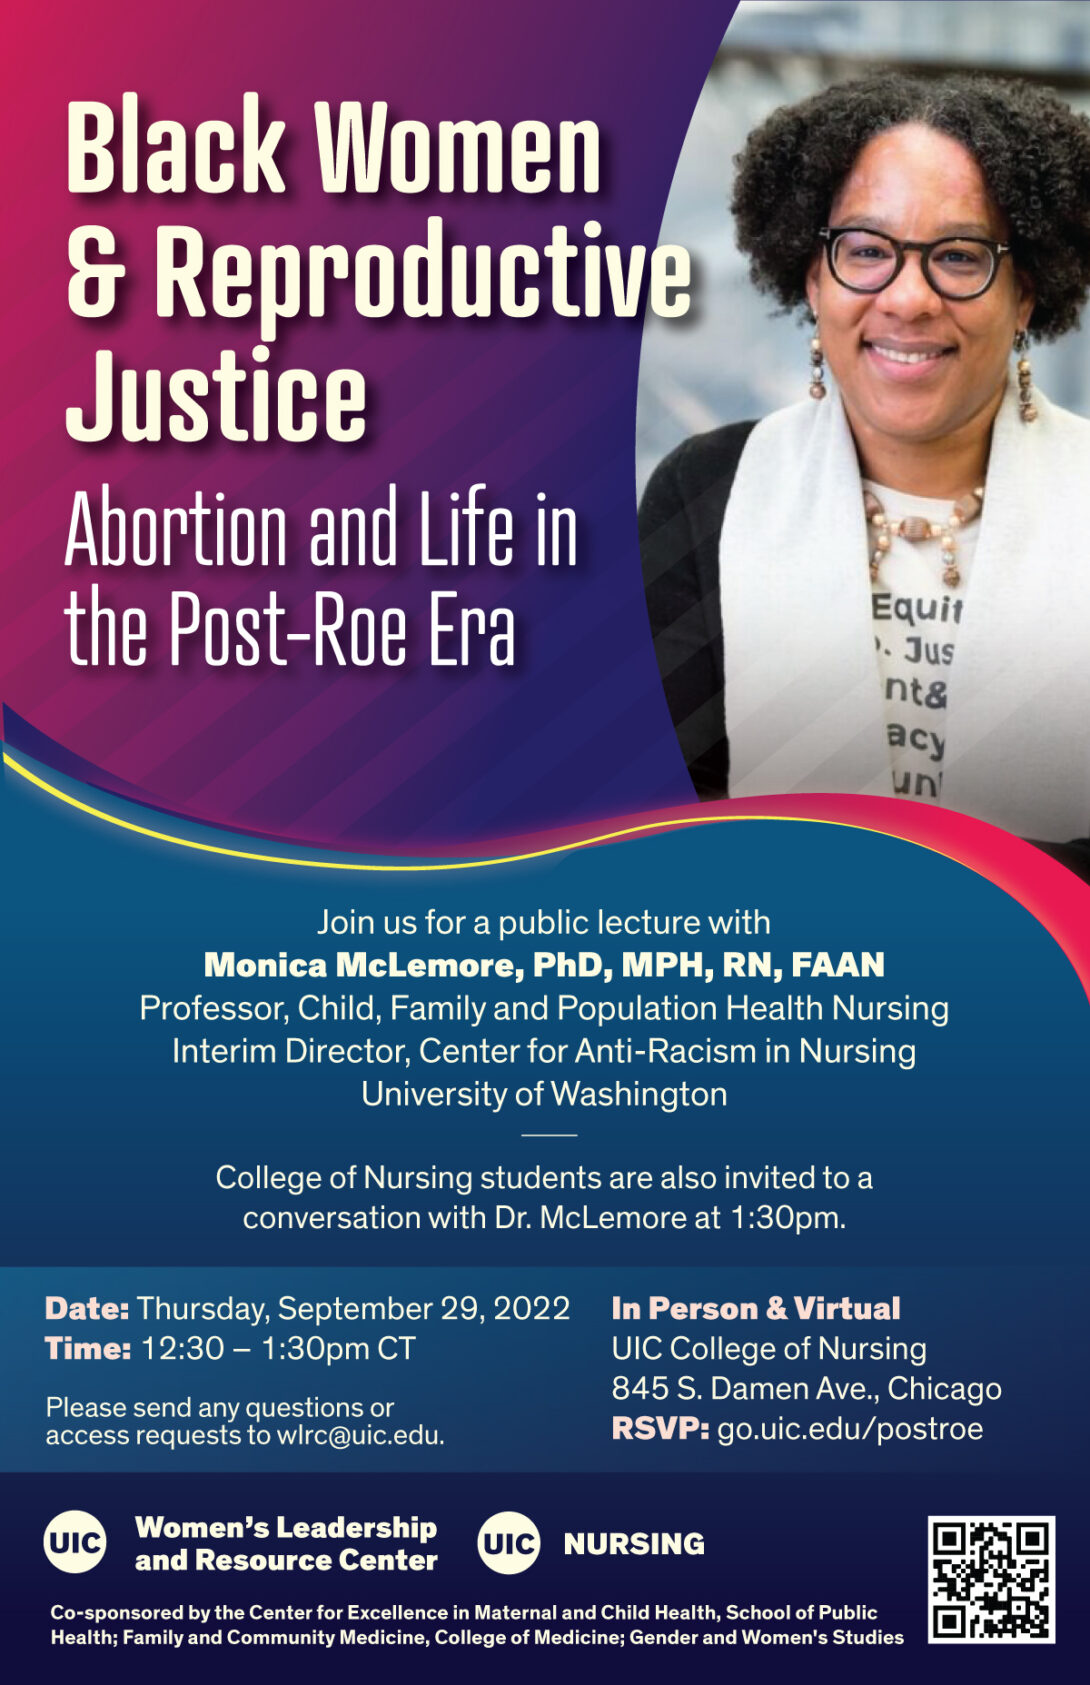 Dr. Monica McLemore smiling toward the camera. To her left is the title of the event in yellow text on a purple background: 